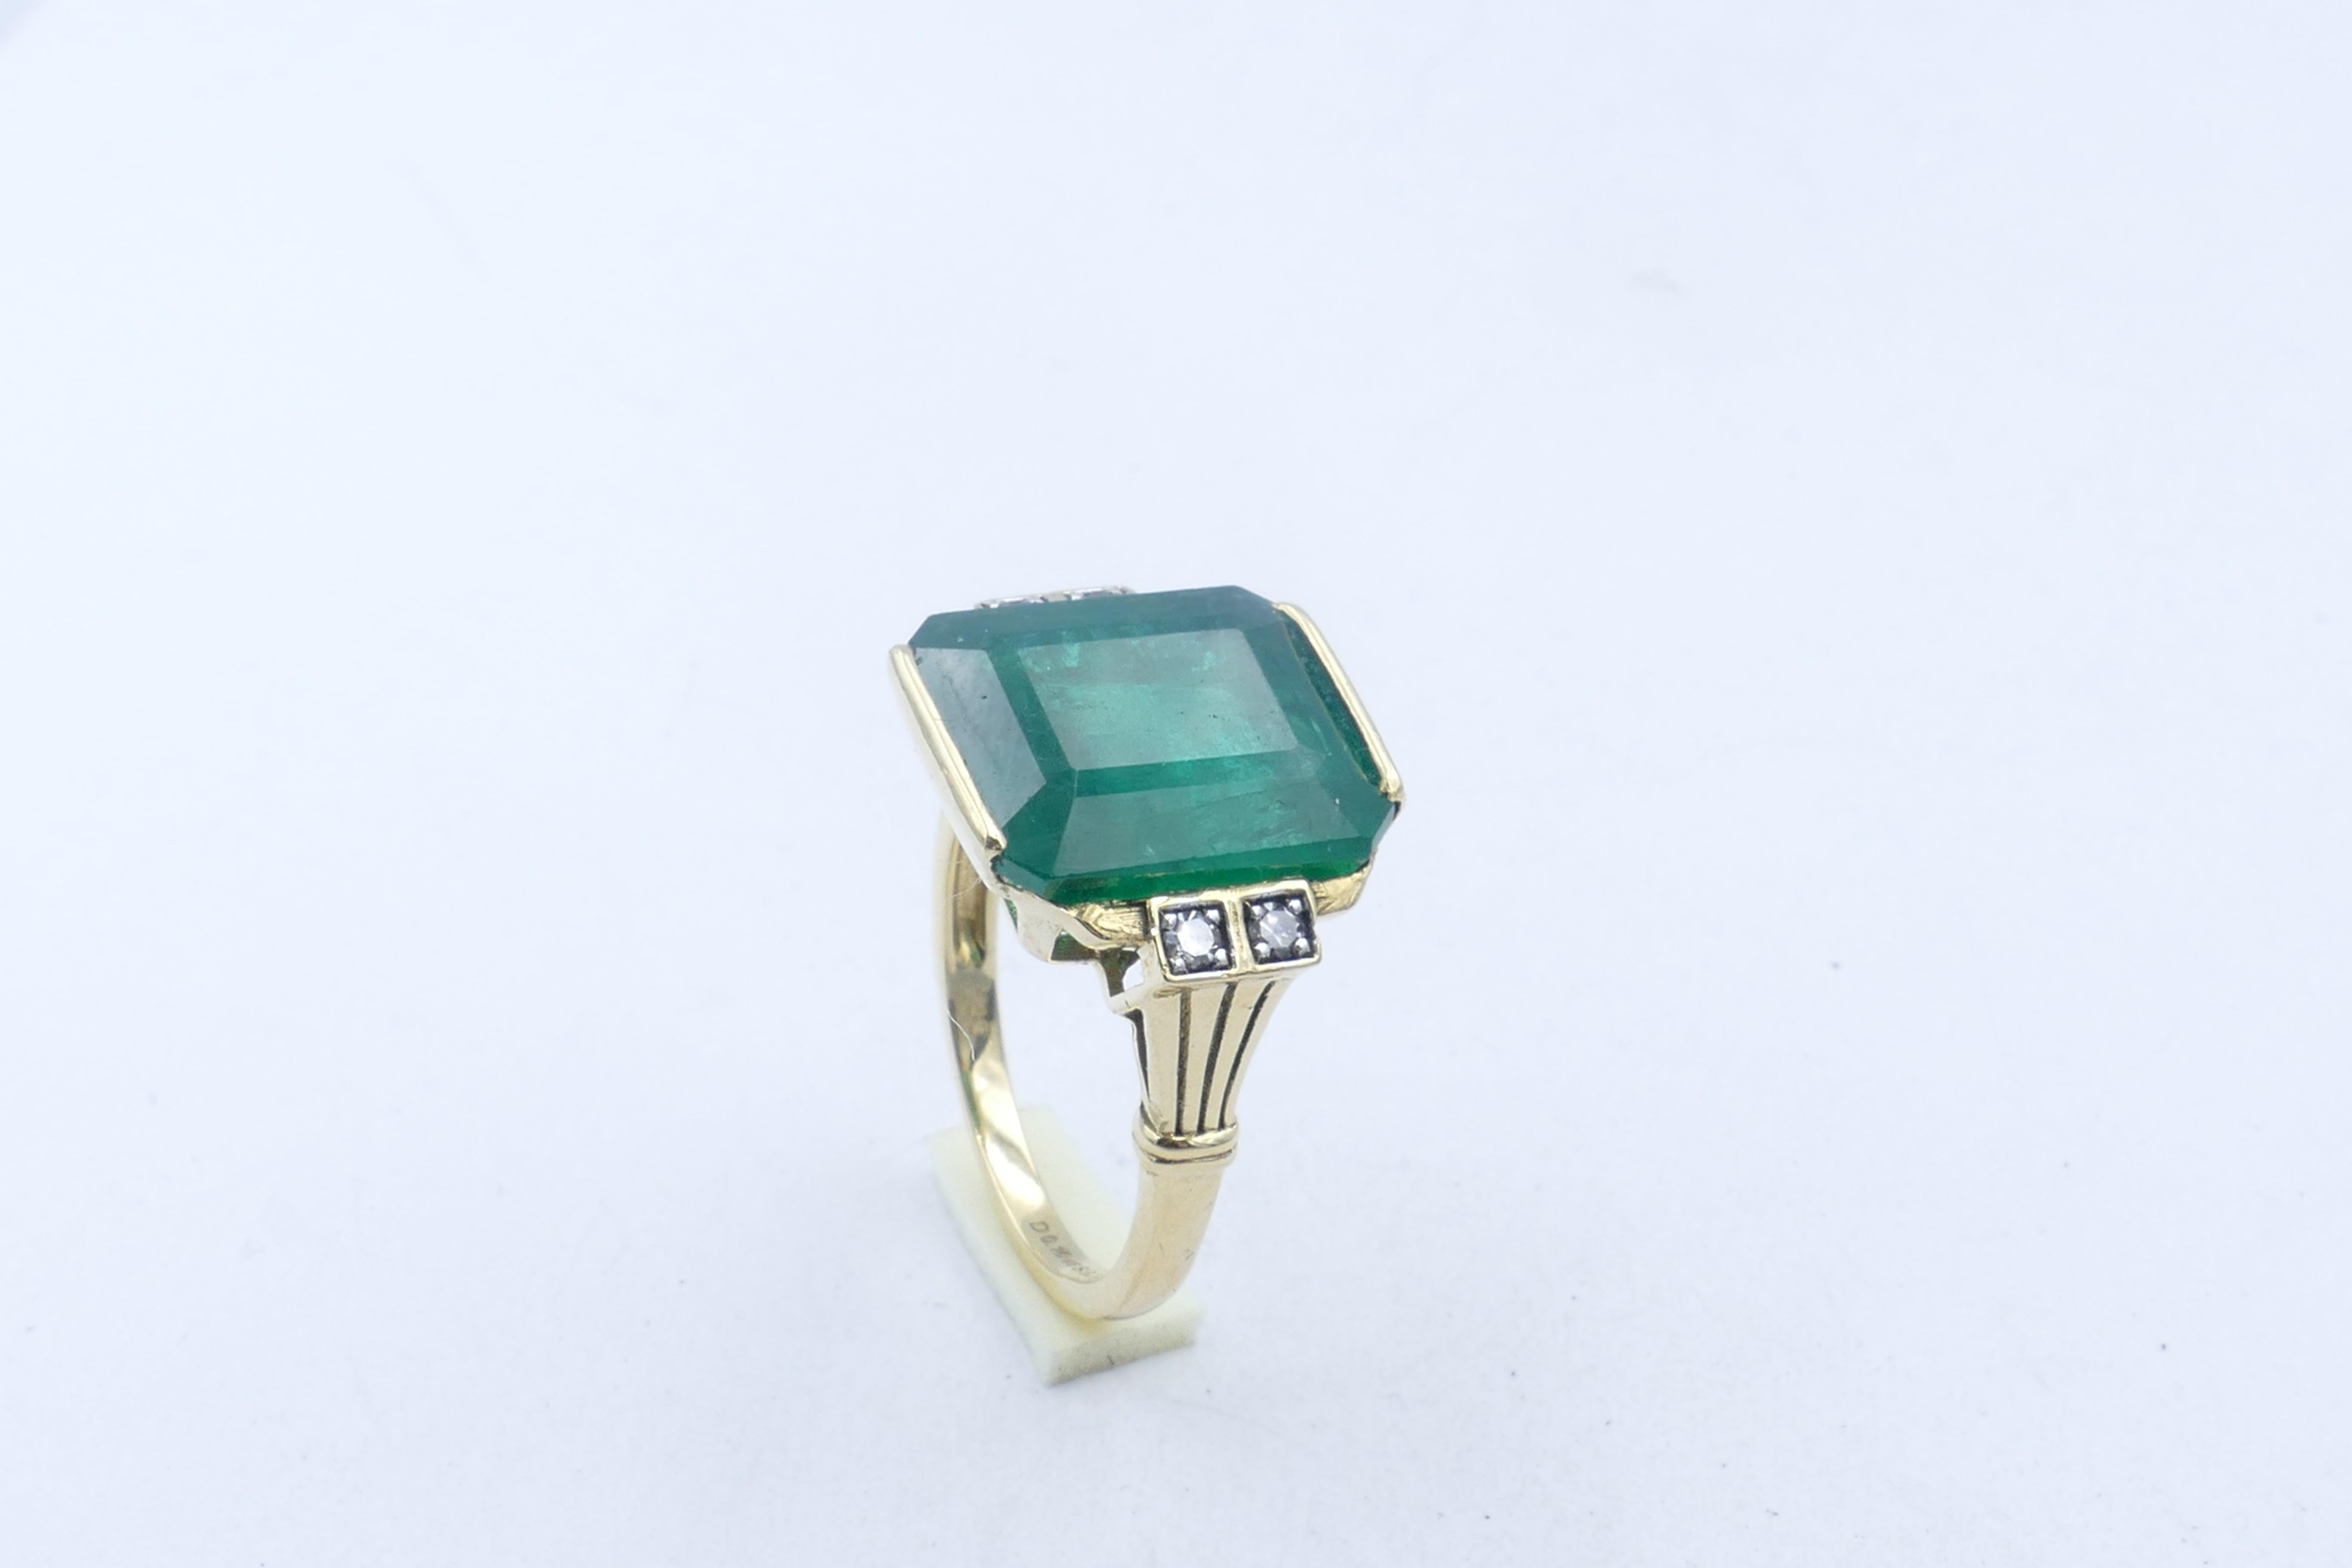 Stunning strong colour Emerald Stone, dimensions 13.35mm X 11.82mm X 7mm forms the centrepiece of this beautiful, classic Ring.
The Emerald is embellished with with 4 bead set natural single cut Diamonds, colour G, Clarity VS2 - SI2.
Total Gemstone